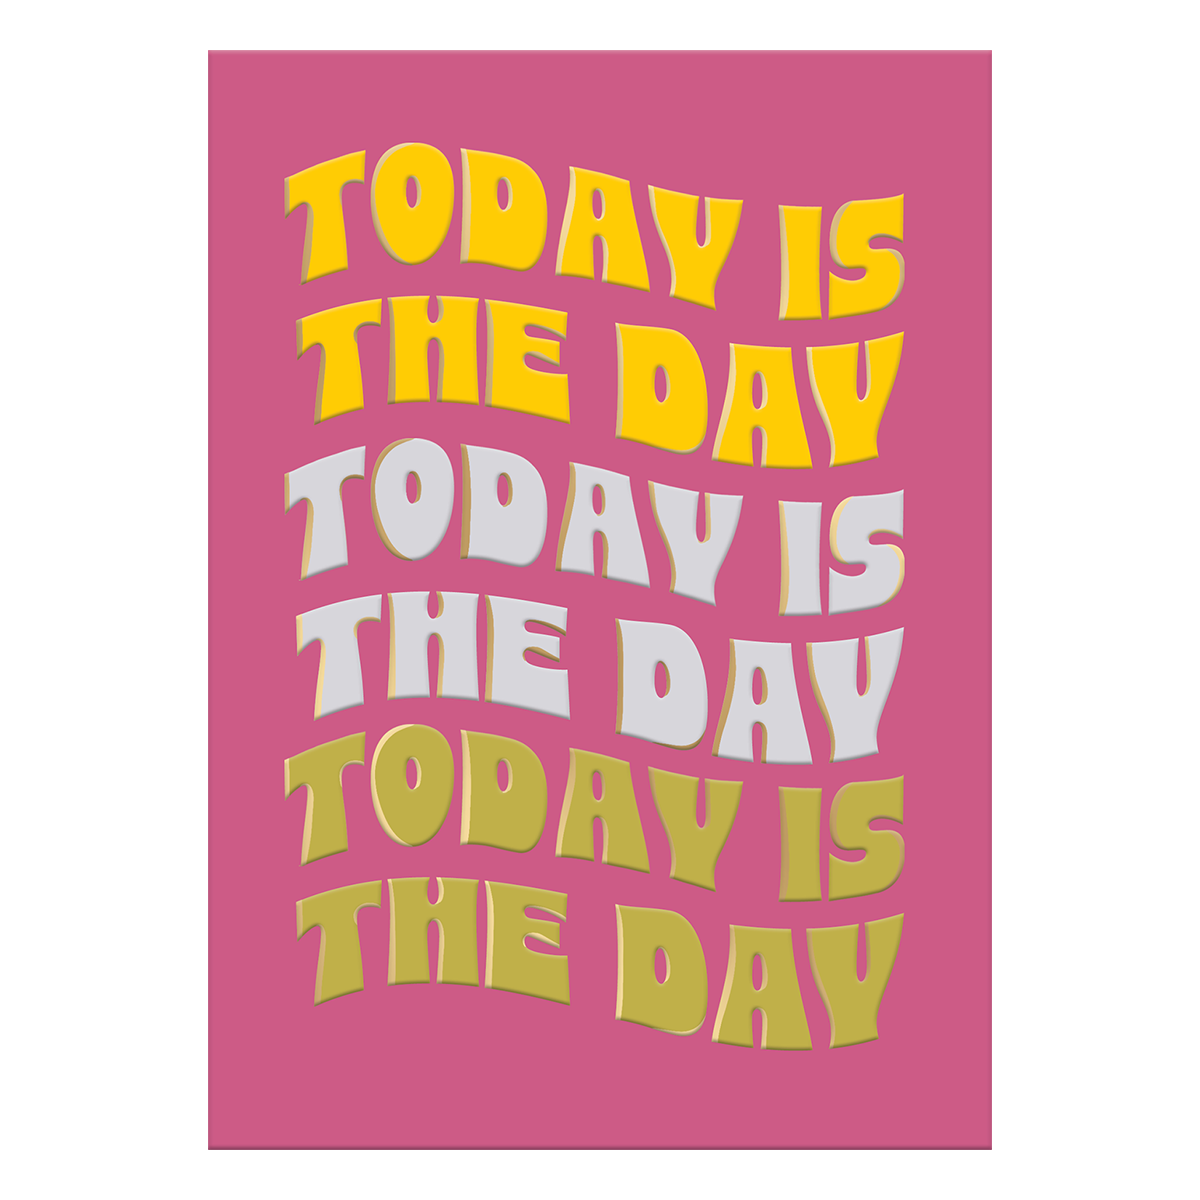 Today Is The Day Greeting Card Product